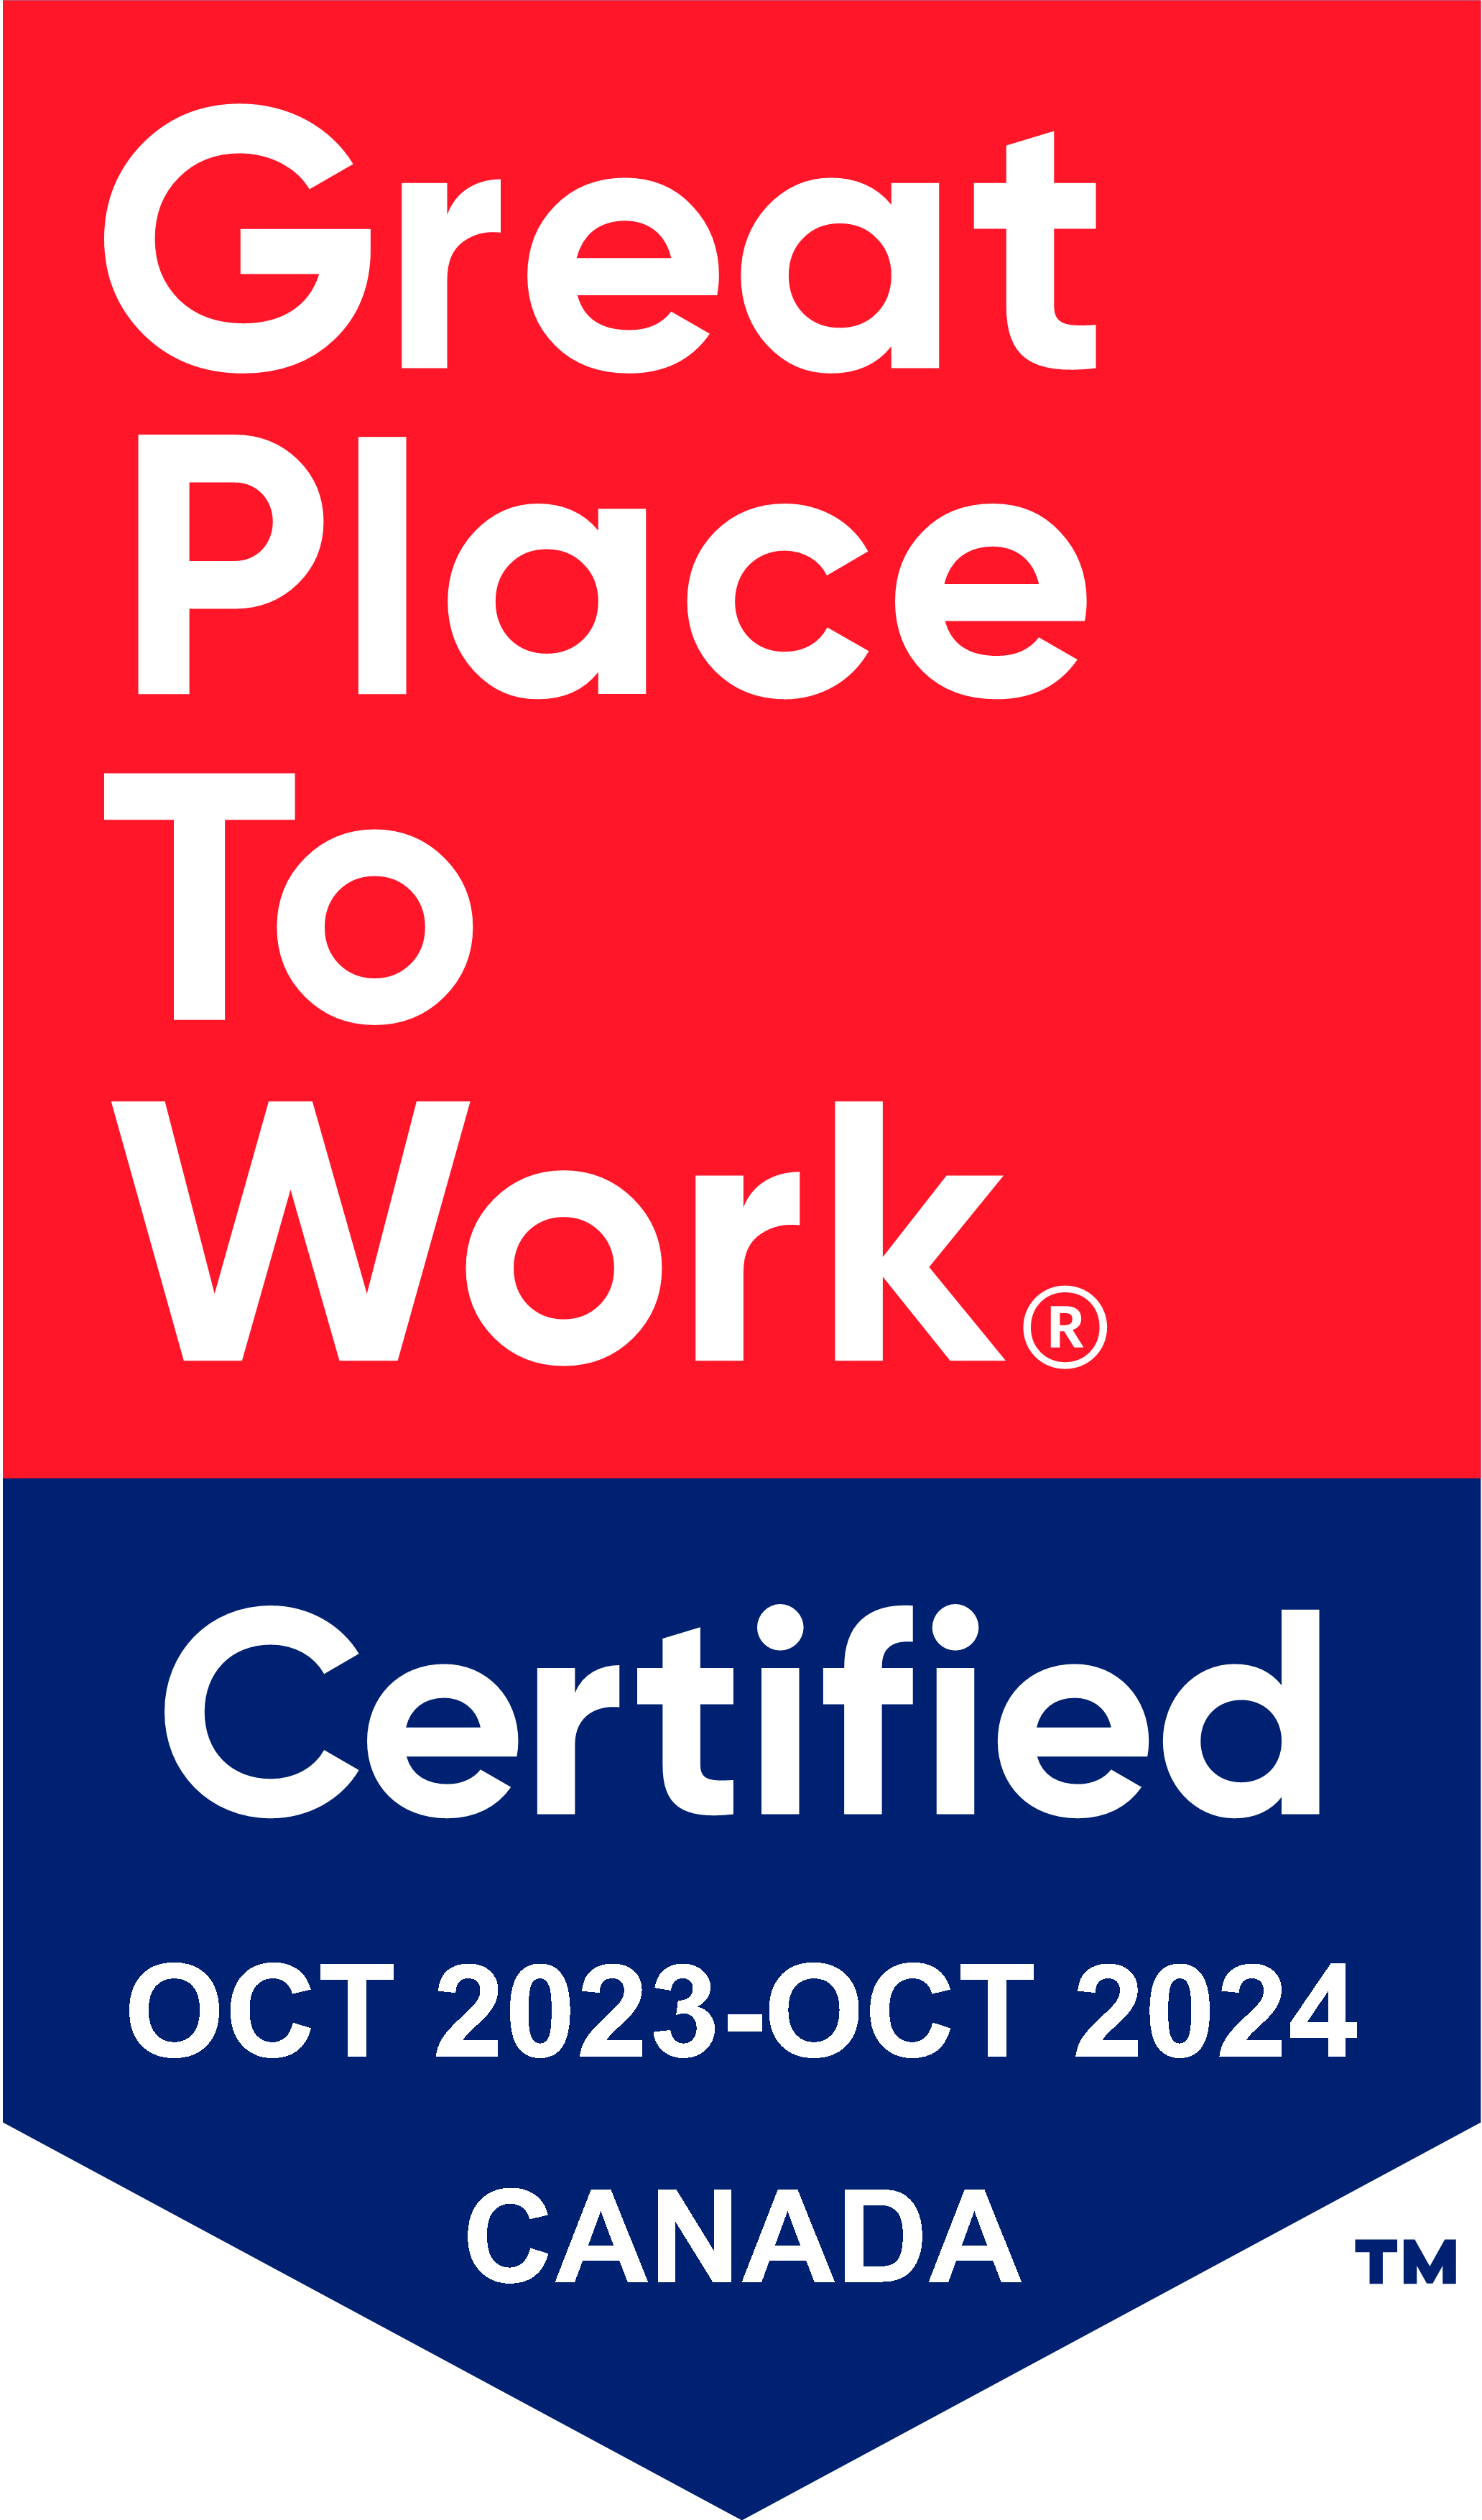 Greate Place to Work Certified - October 2023 - October 2024 Canada